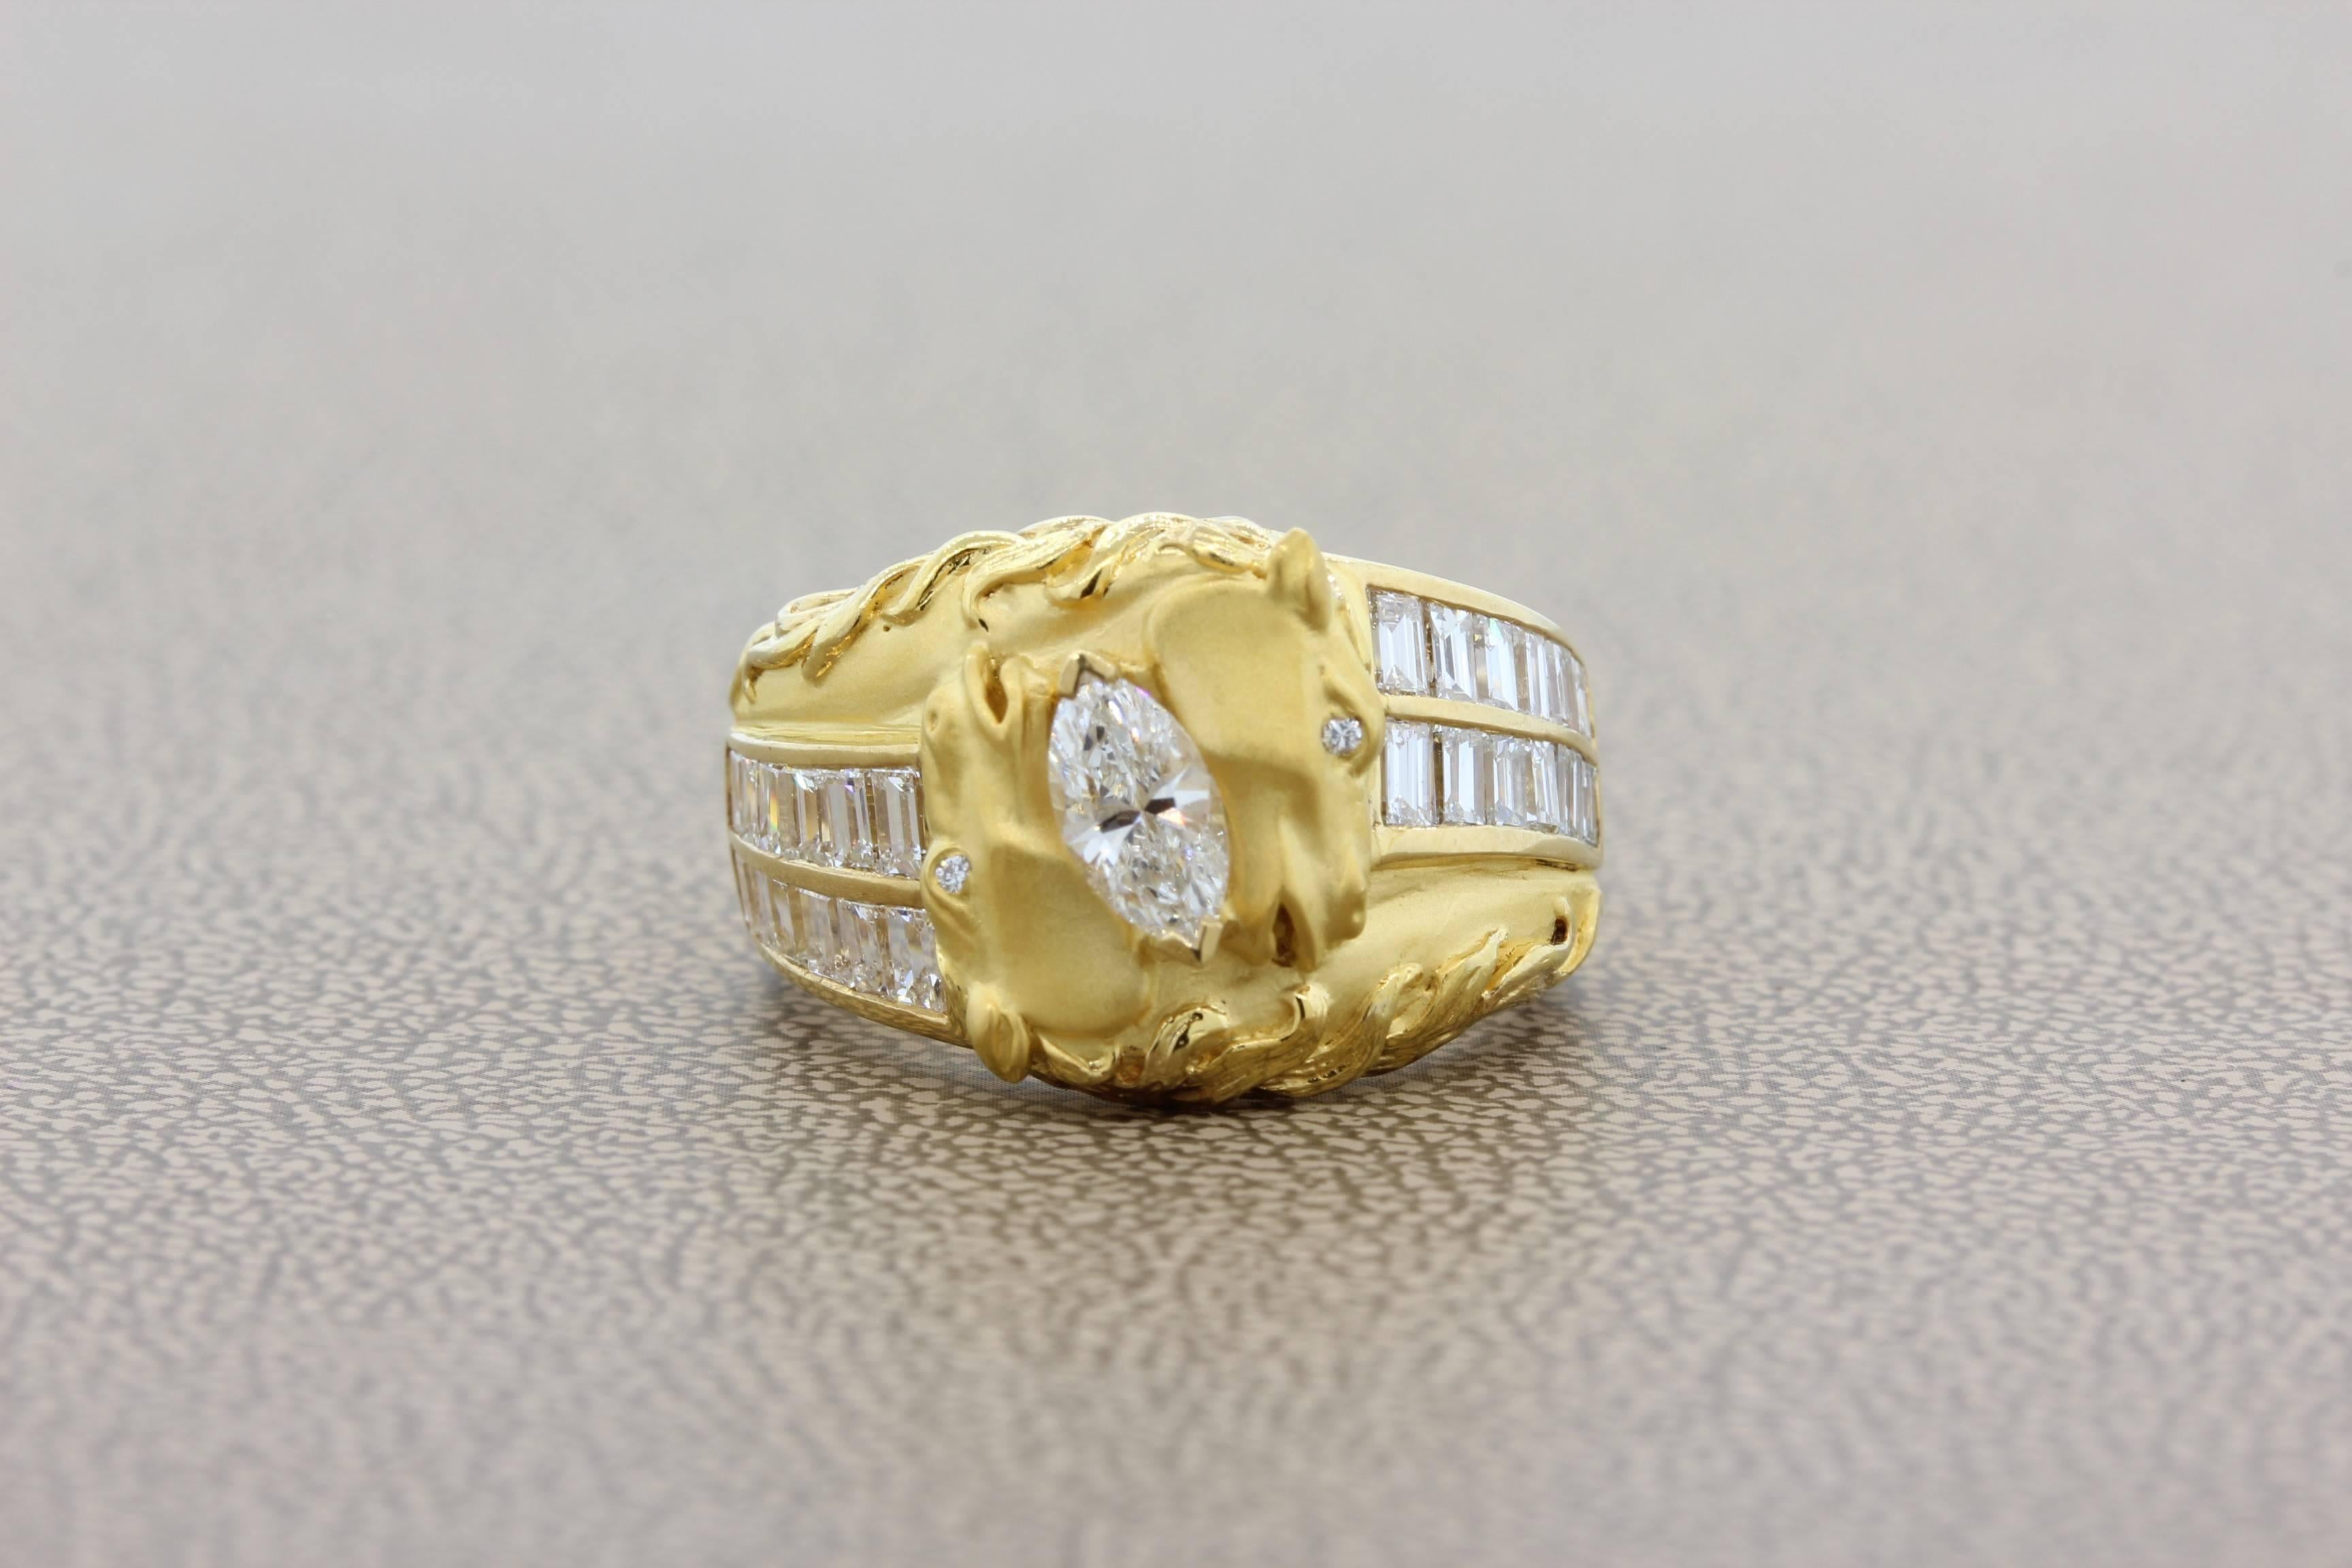 A finely detailed ring by Carrera y Carrera, exquisite jewelry makers from Madrid. The ring features a center marquise cut diamond set between two stallions with even baguette cut diamonds tapering on the sides of the piece. Set in 18K yellow gold,